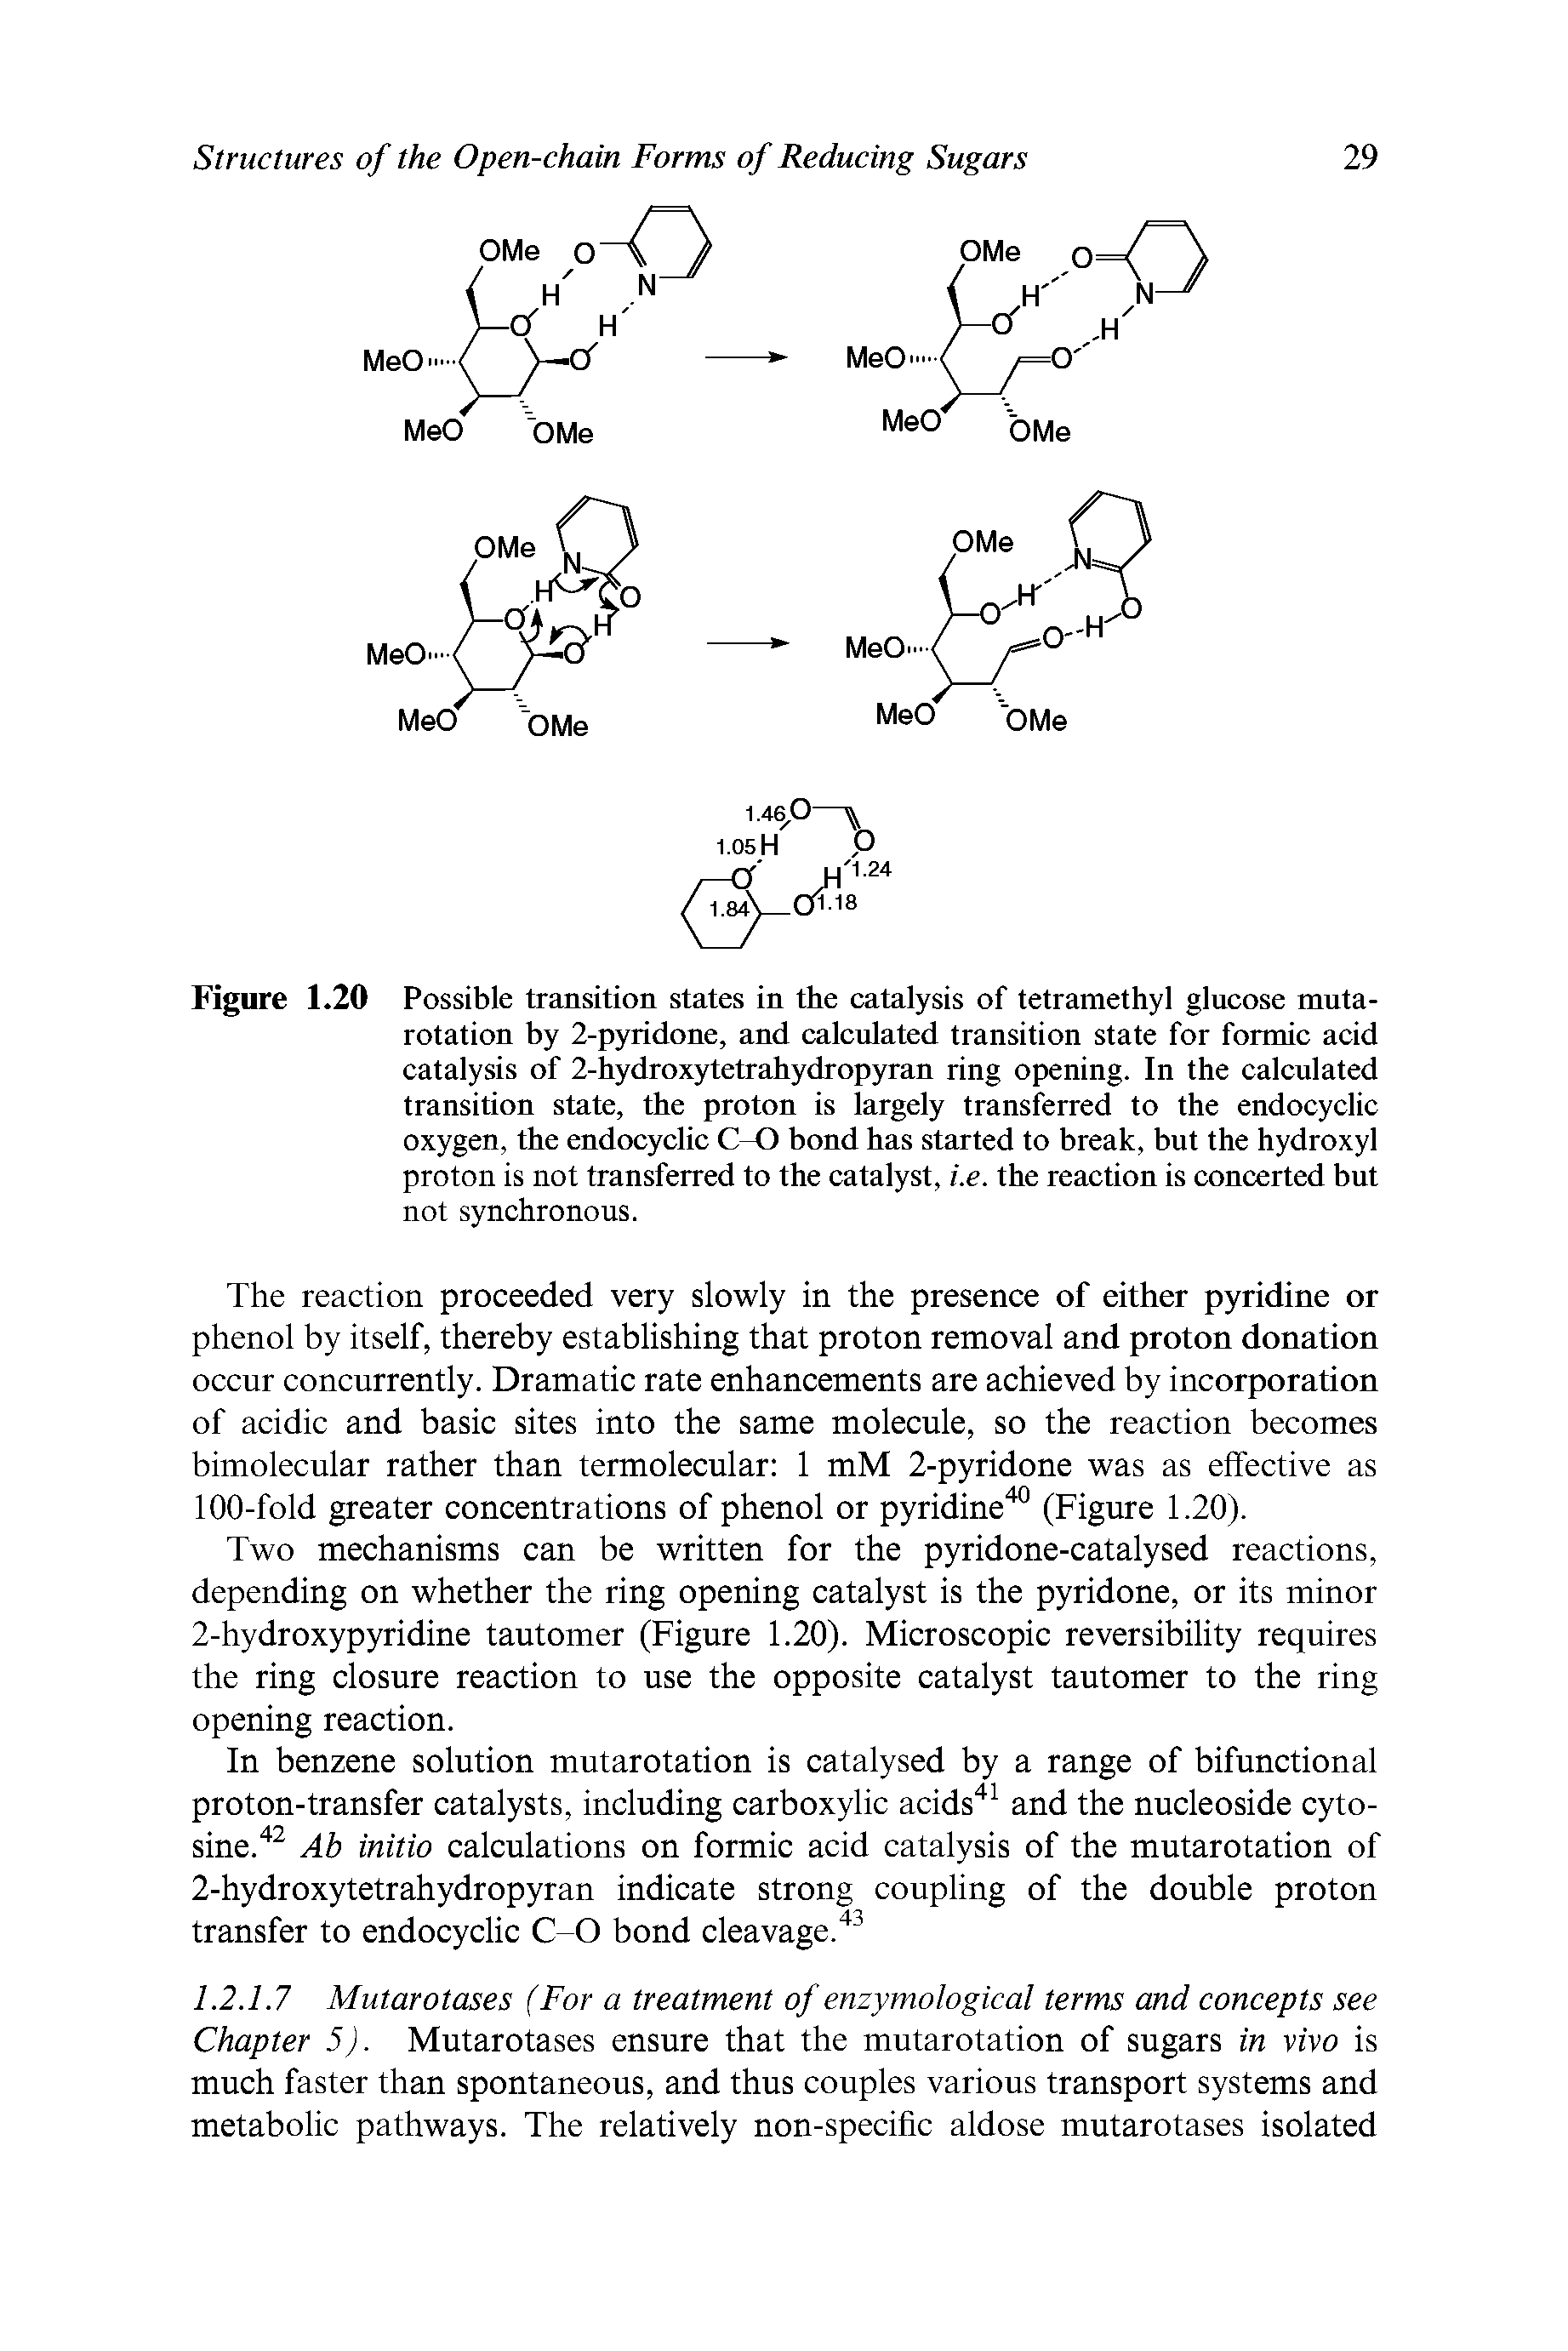 Figure 1.20 Possible transition states in the catalysis of tetramethyl glucose muta-rotation by 2-pyridone, and calculated transition state for formic acid catalysis of 2-hydroxytetrahydropyran ring opening. In the calculated transition state, the proton is largely transferred to the endocyclic oxygen, the endocyclic C-O bond has started to break, but the hydroxyl proton is not transferred to the catalyst, i.e. the reaction is concerted but not synchronous.